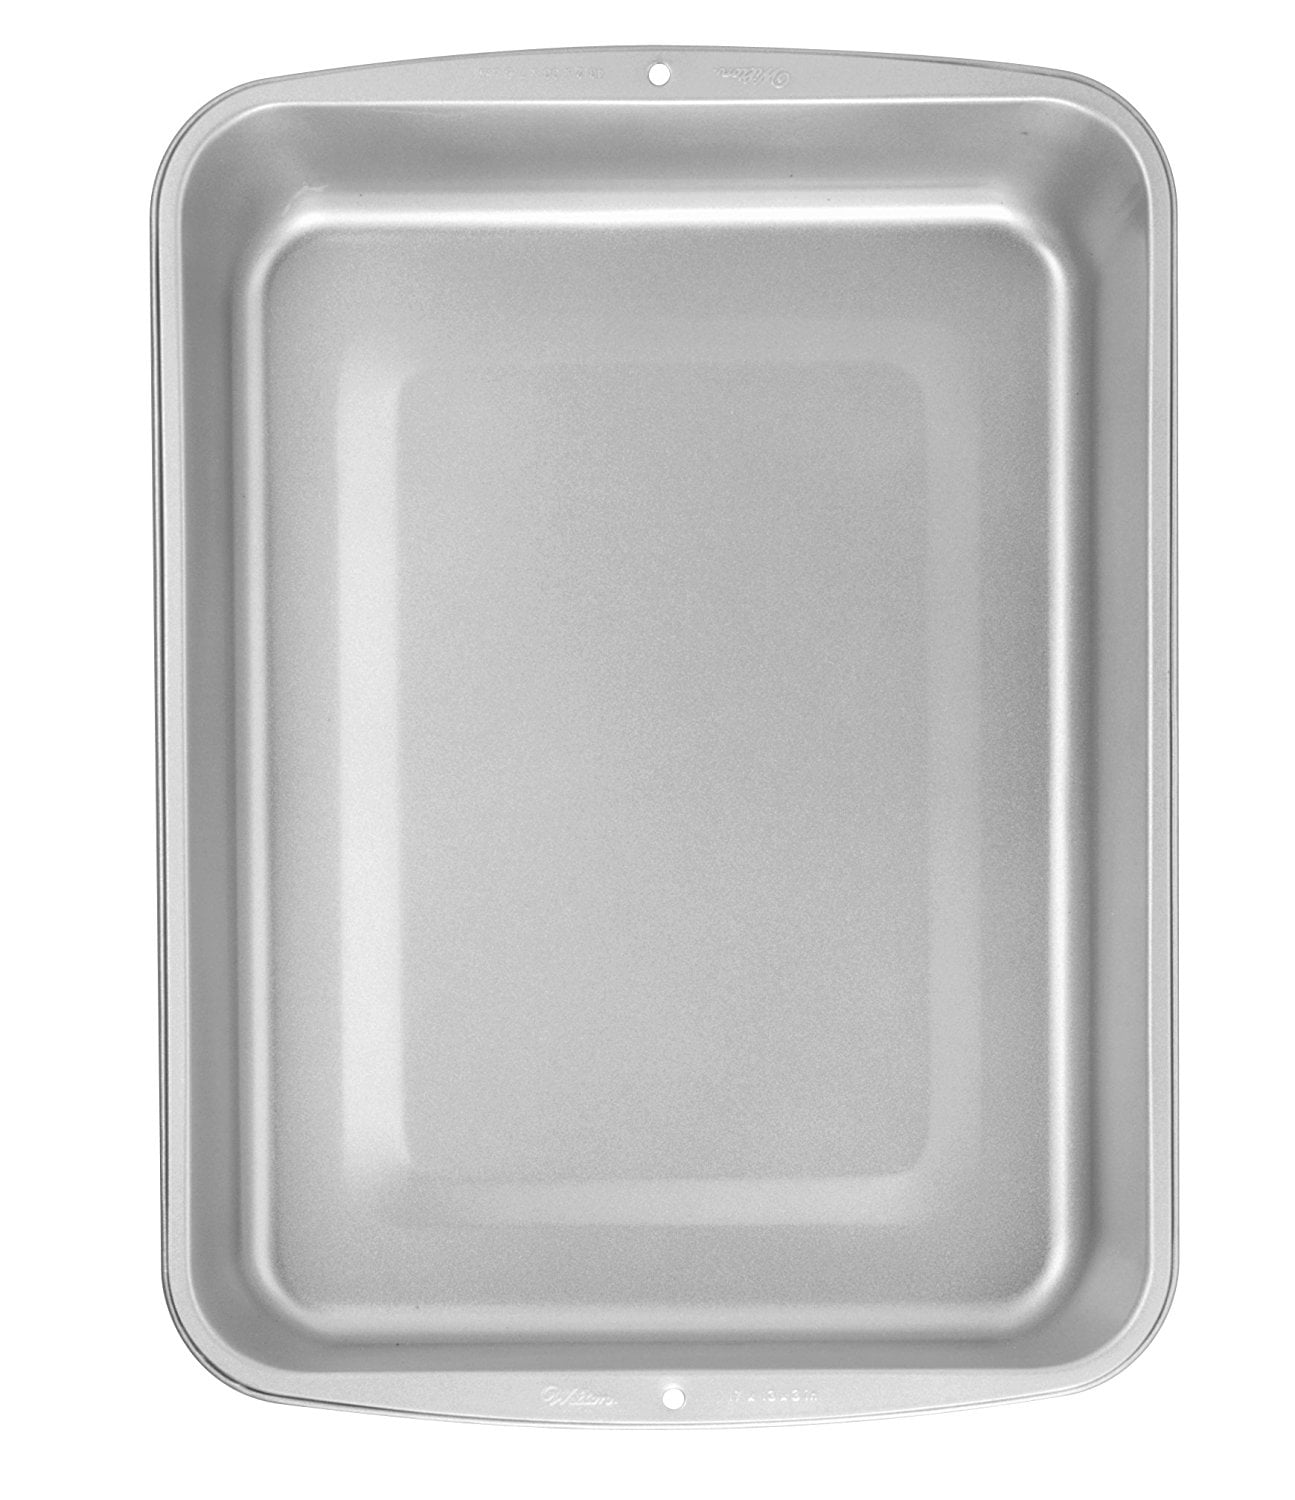 Recipe Right Steel Non-Stick 9 X 13-Inch Oblong Cake Pan Set, 2-Count